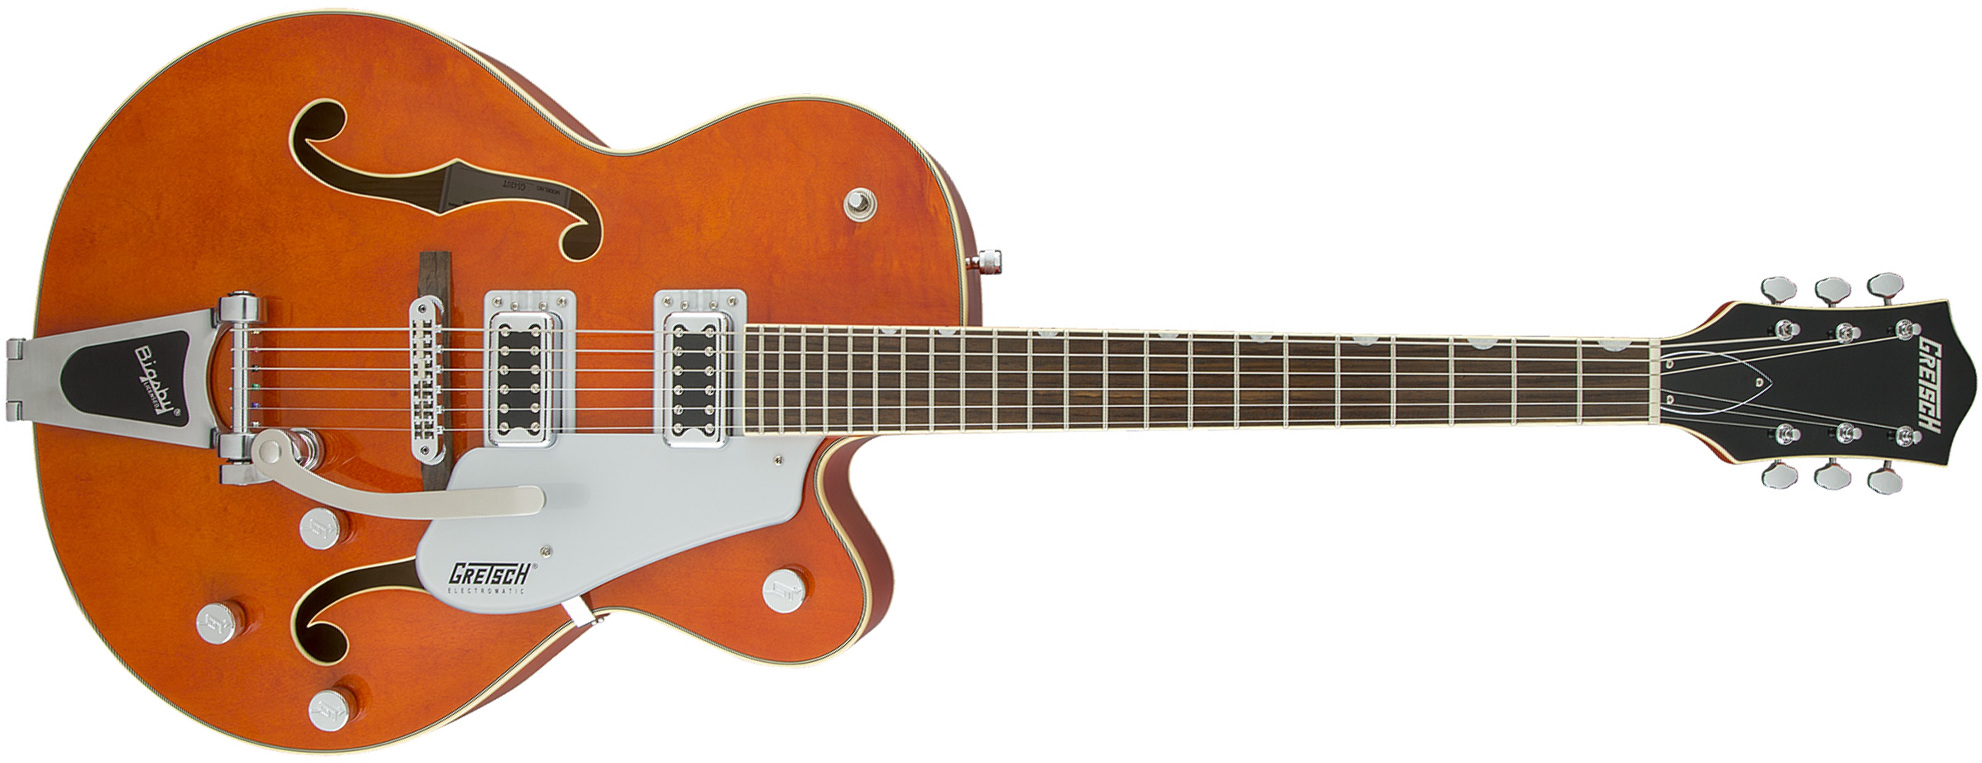 Gretsch G5420t Electromatic Hollow Body 2016 - Orange Stain - Hollow-body electric guitar - Main picture